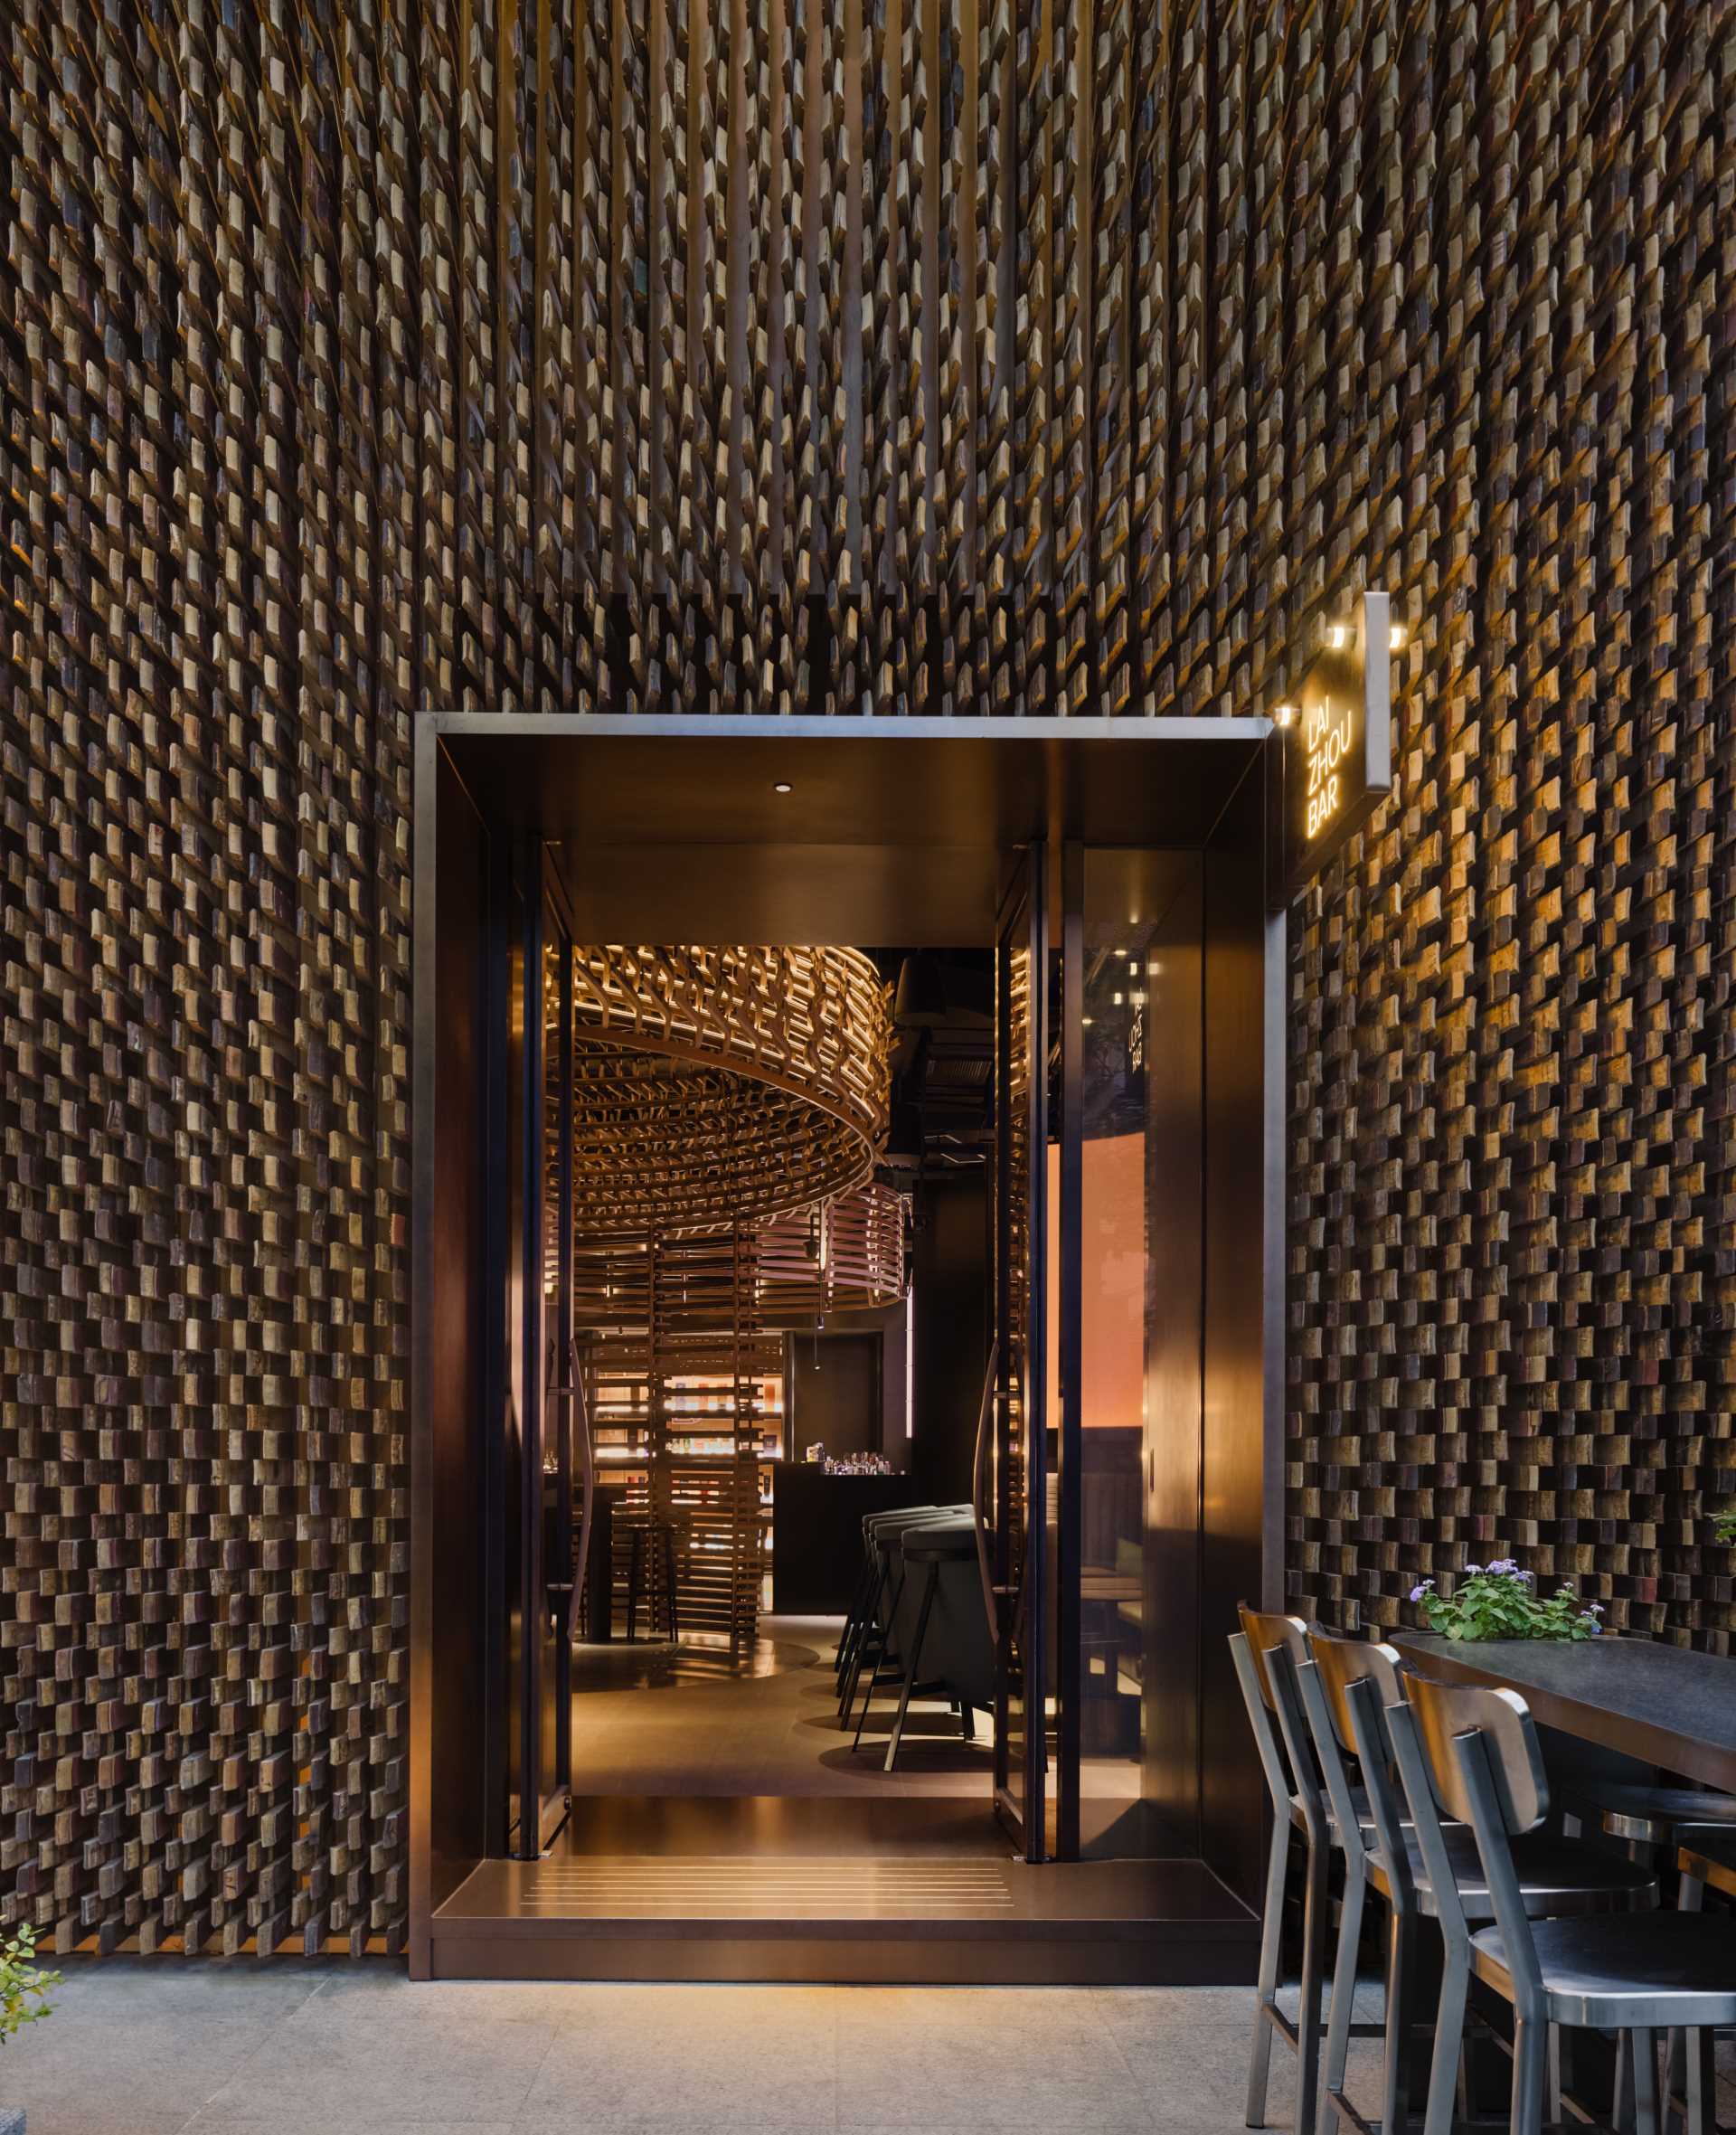 6000 pieces of discarded wooden whiskey barrels were recycled to make the facade and interior of this modern bar.